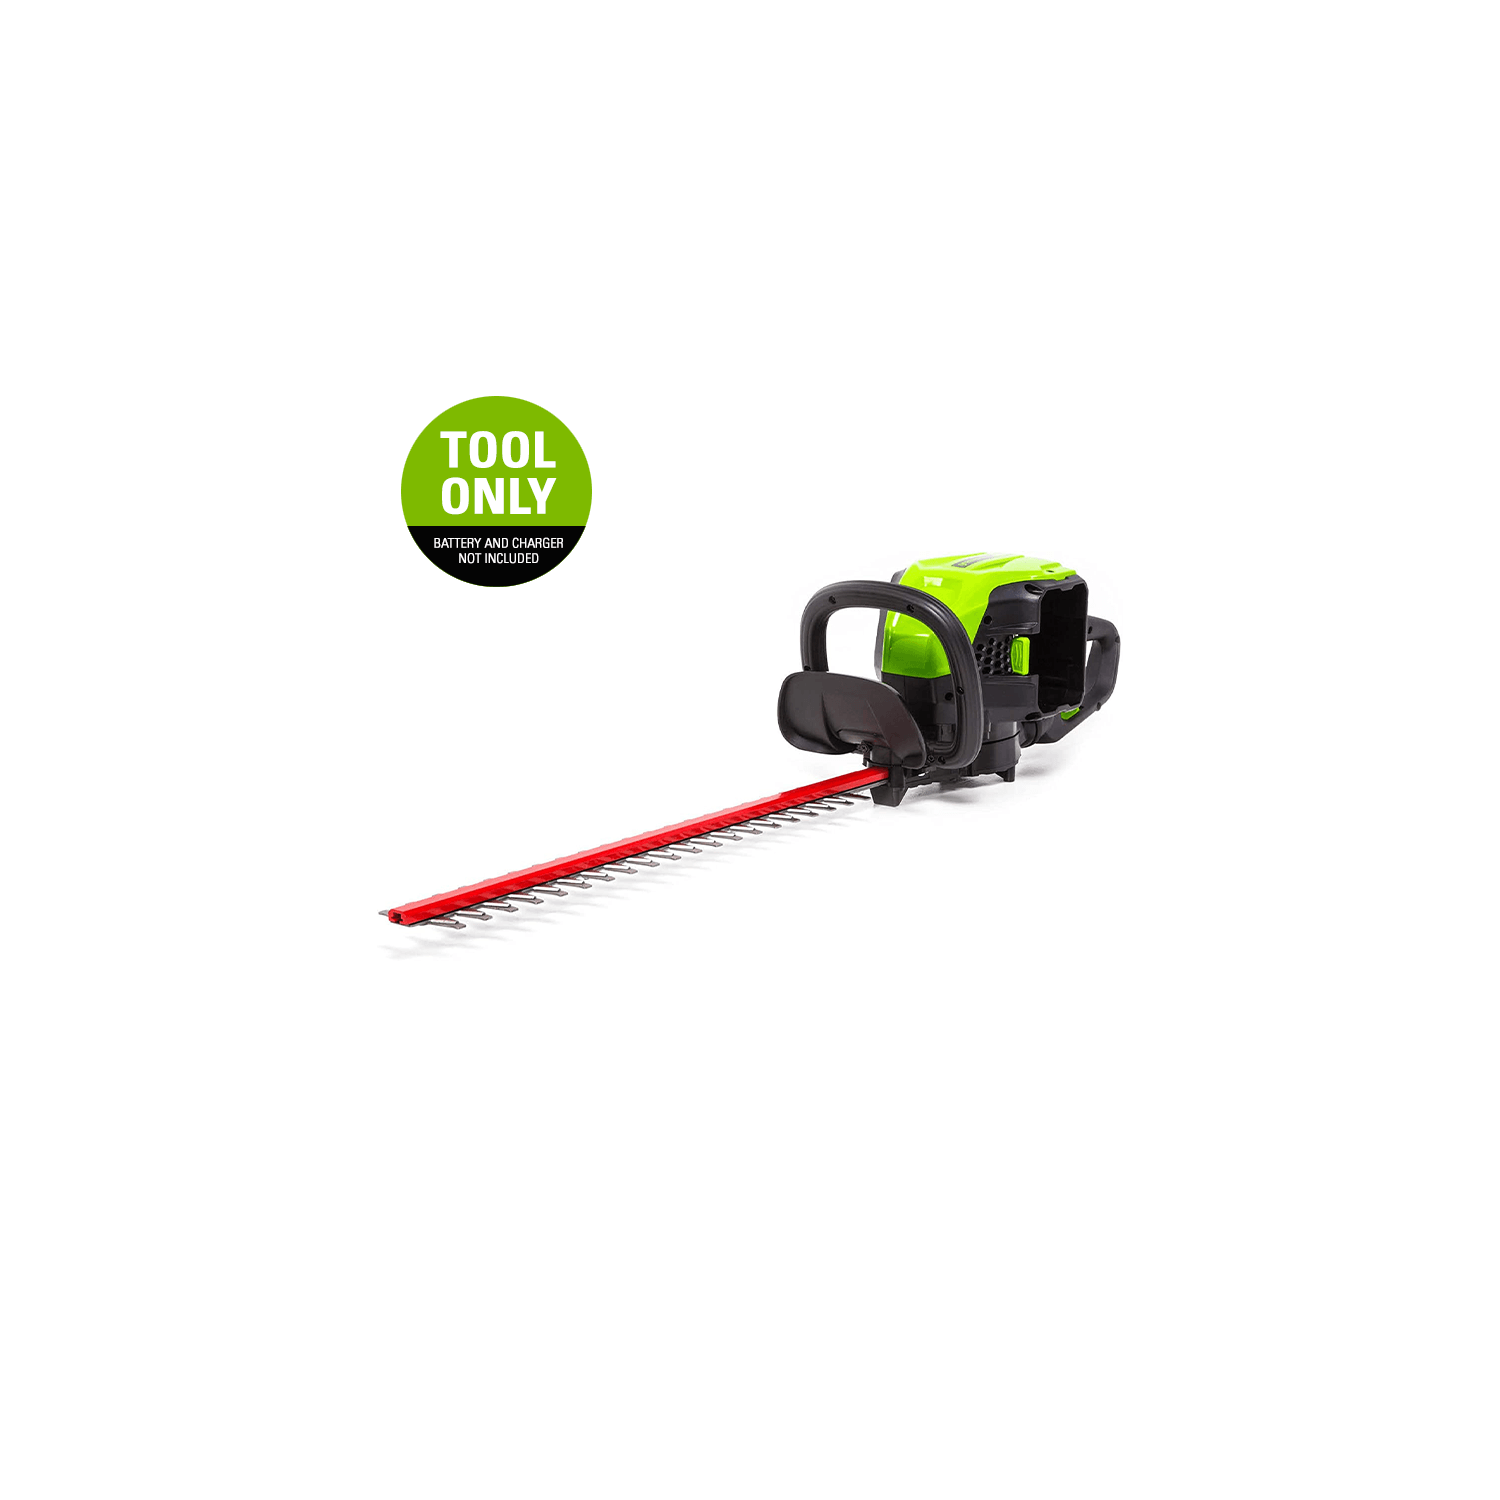 Greenworks PRO 80V 26-Inch Cordless Hedge Trimmer, Battery and Charger Not Included